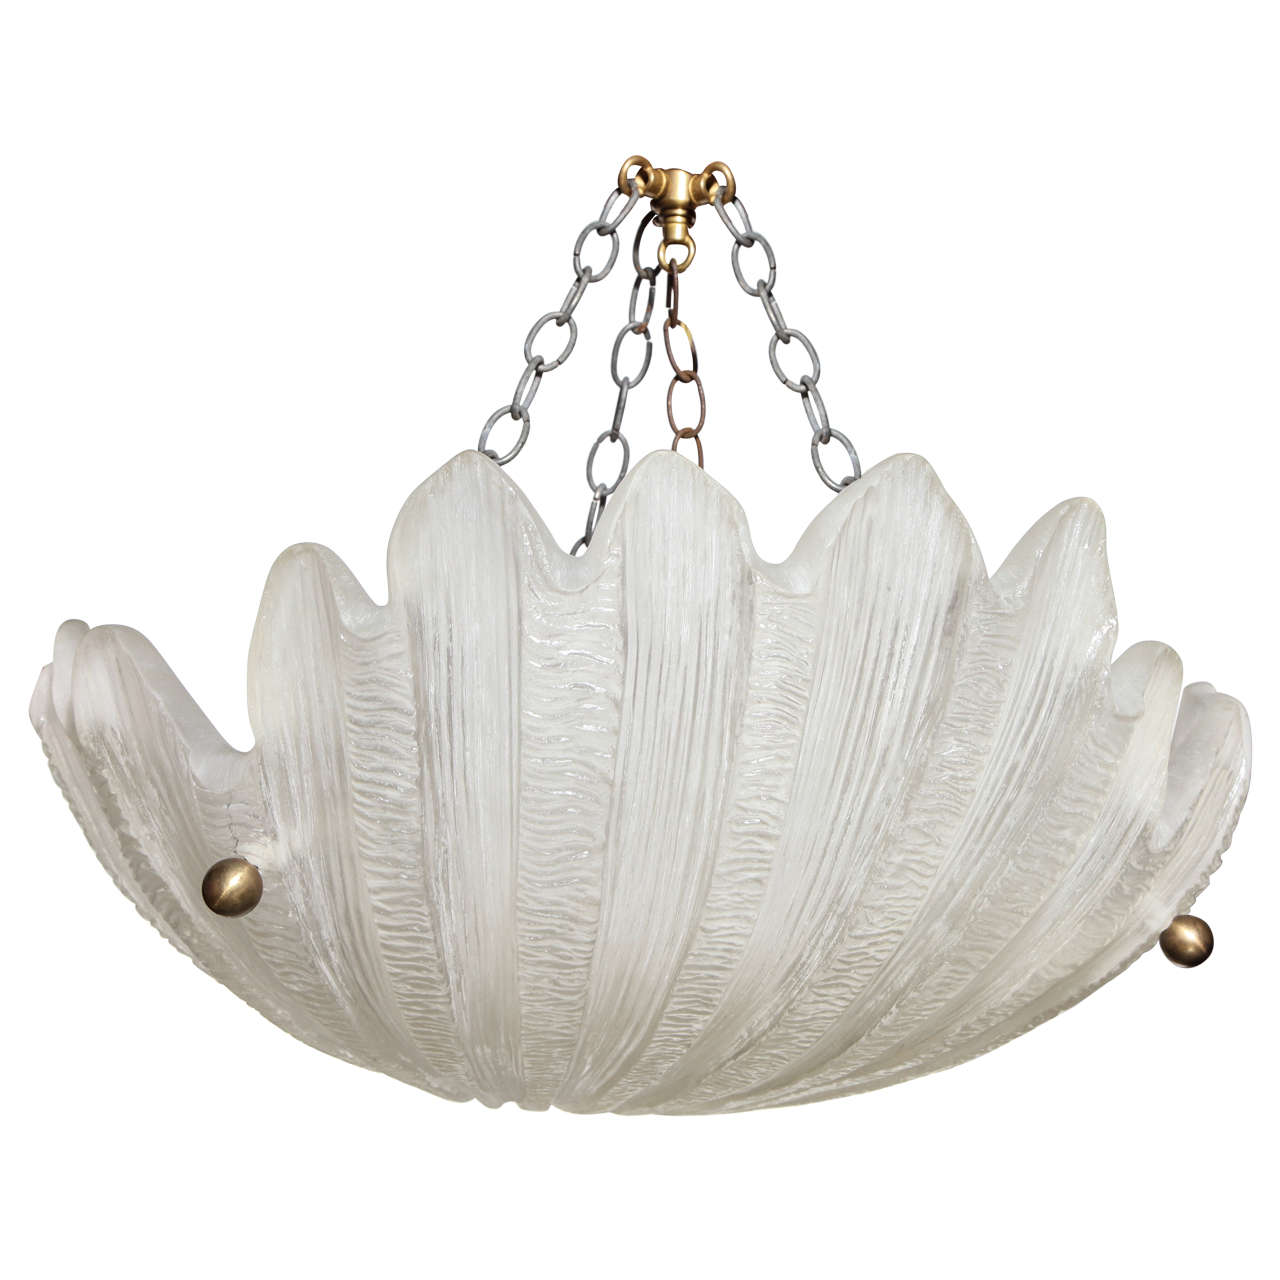 Craig Corona for Sirmos Co. Sheer Frosted Scallop Shell Hanging Lamp, C. 1970